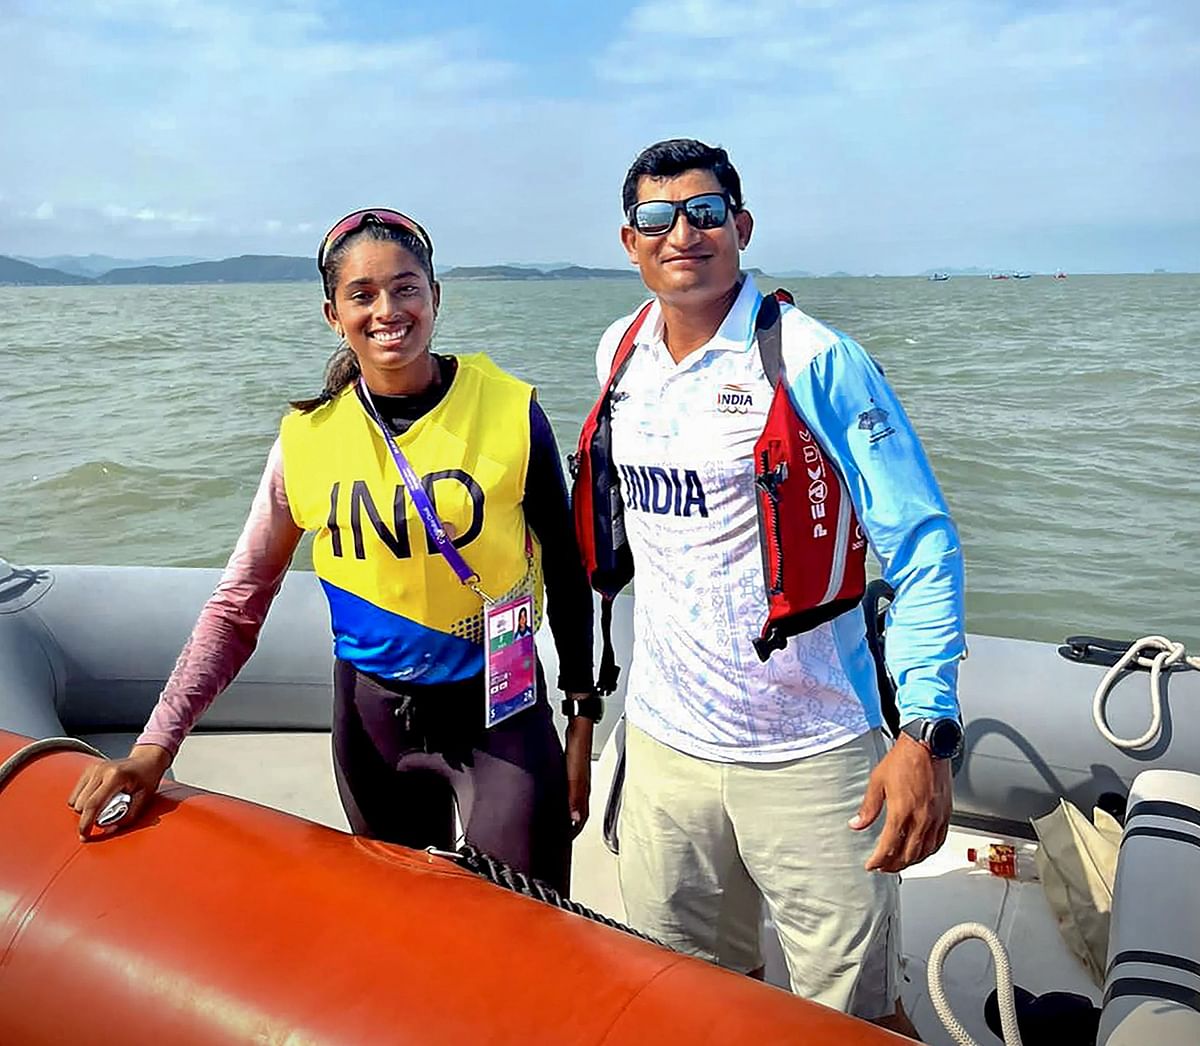 17-year-old Neha Thakur of Madhya Pradesh opened India's account in the Asian Games sailing competitions